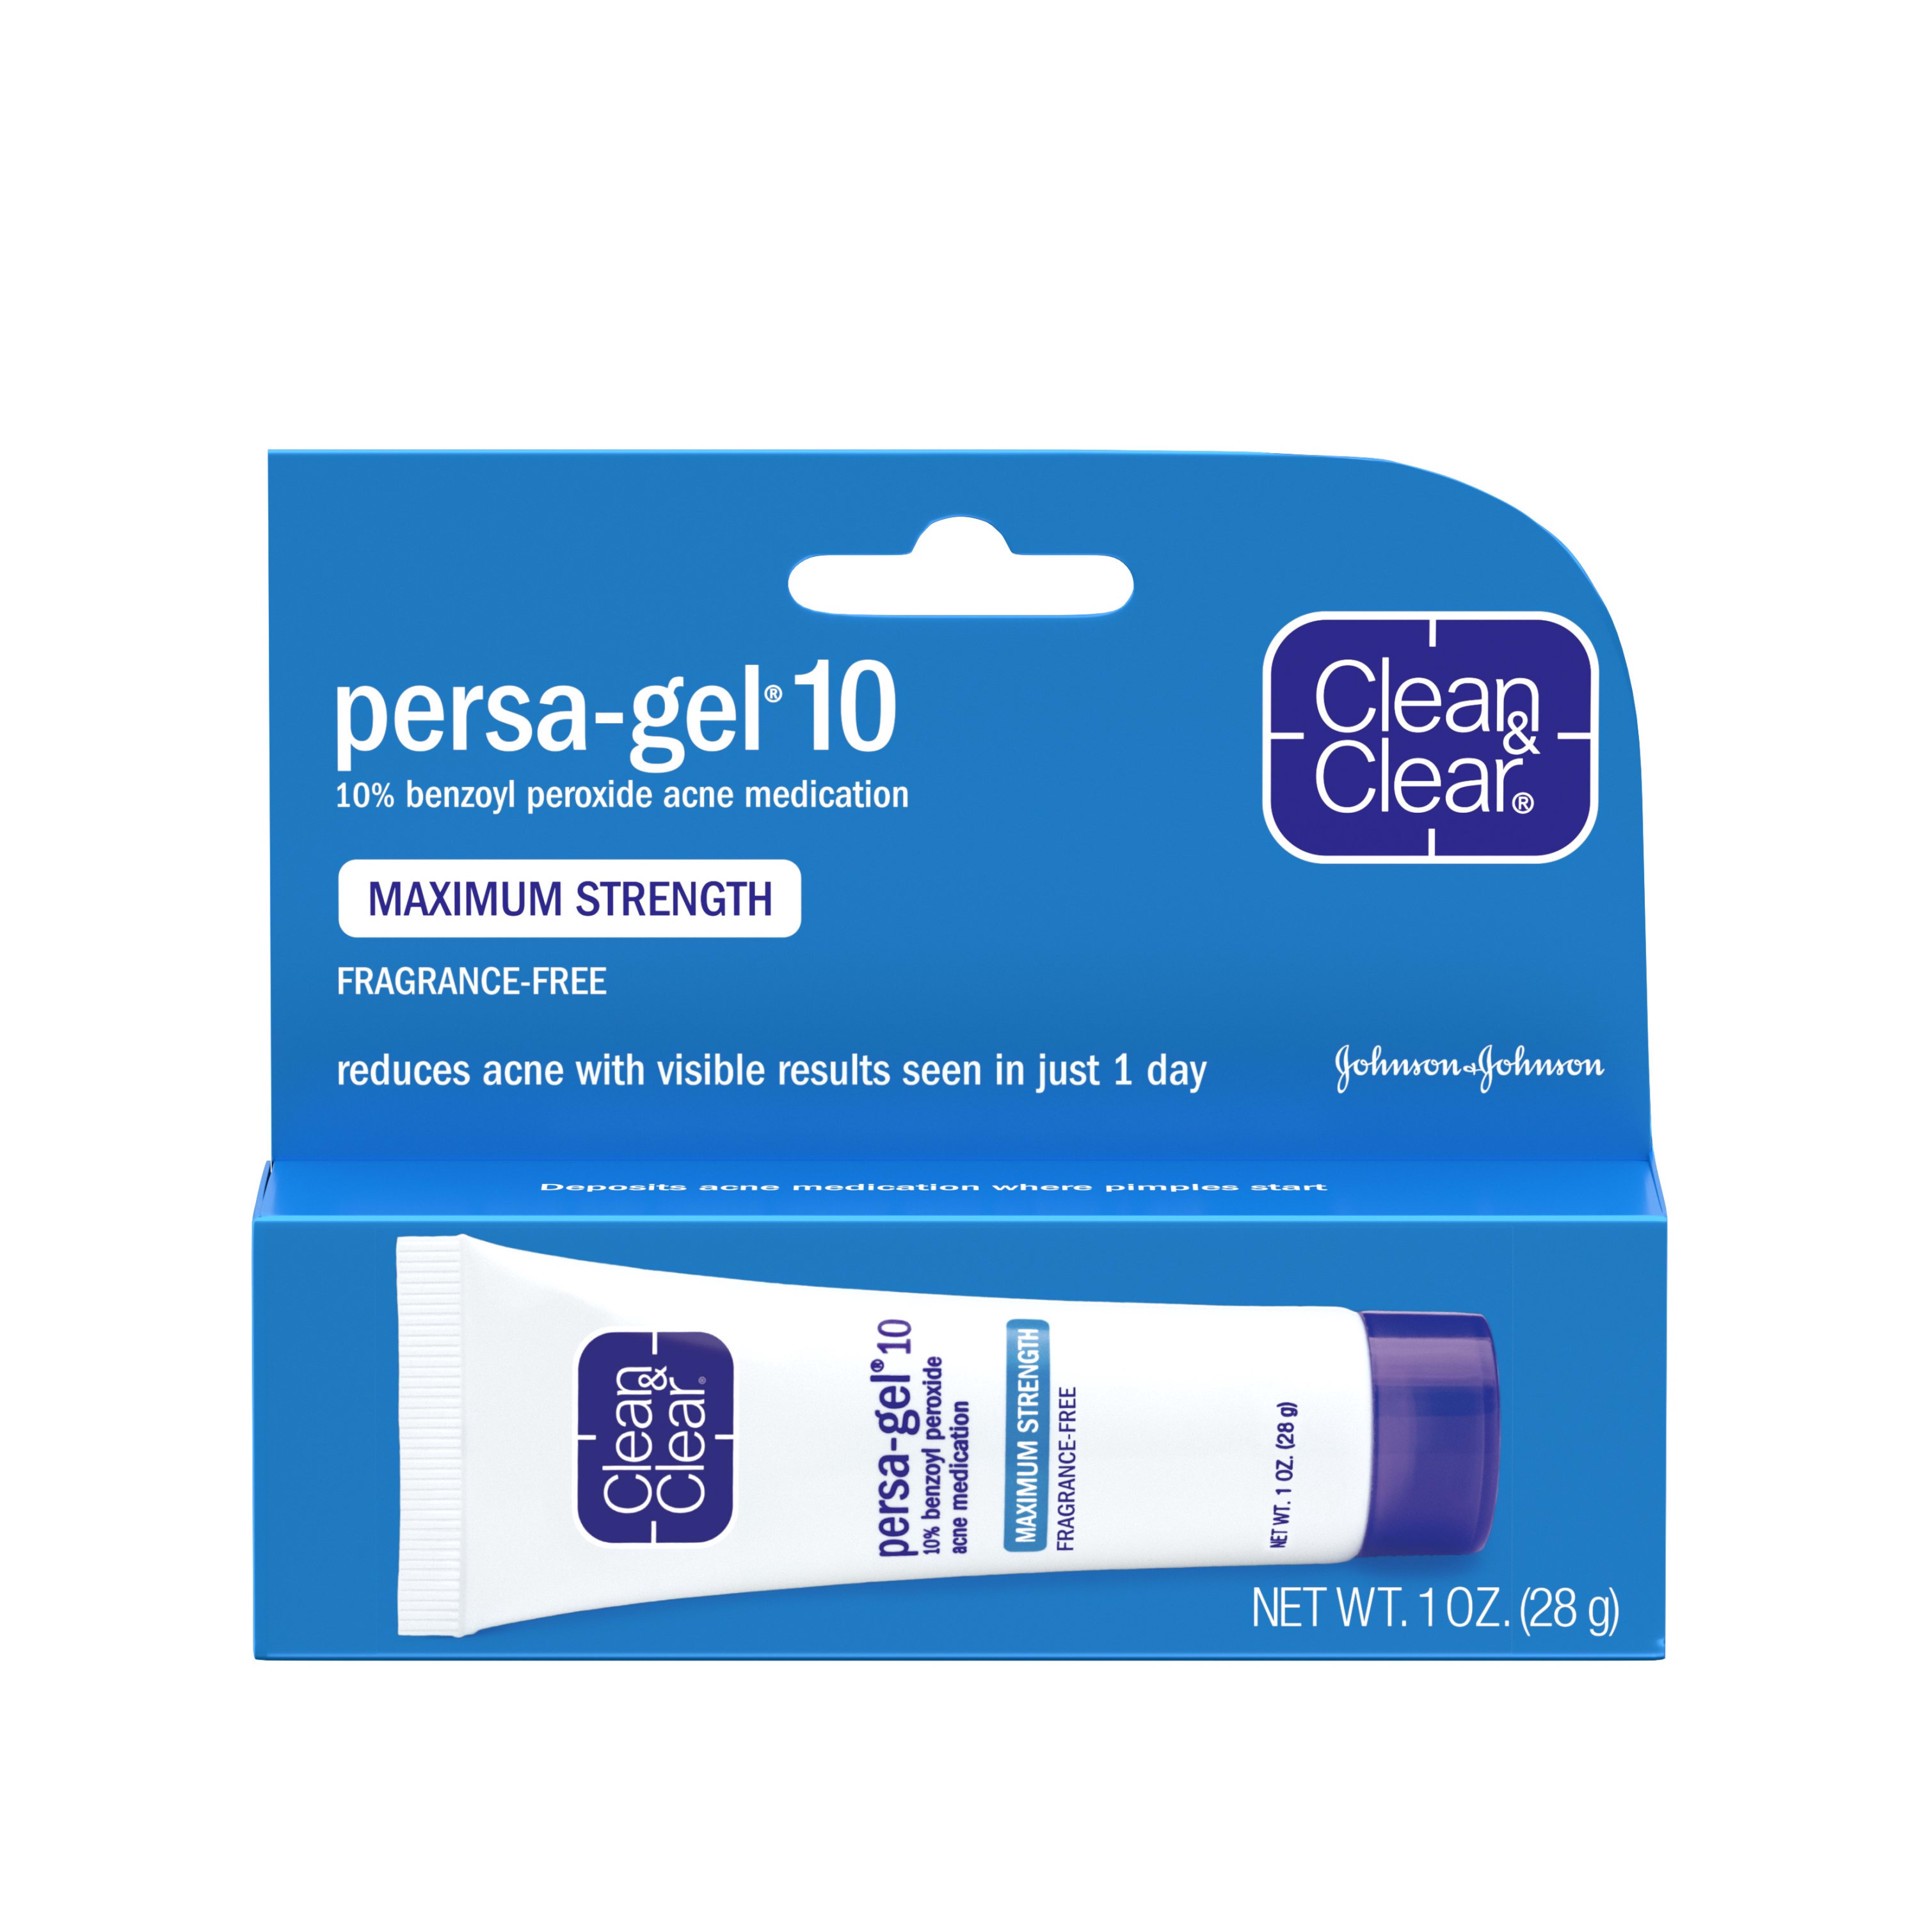 slide 4 of 5, Clean & Clear Persa-Gel 10 Acne Medication Spot Treatment with Maximum Strength 10% Benzoyl Peroxide, Topical Pimple Cream & Acne Gel Medication for Face Acne, Fragrance-Free, 1 oz